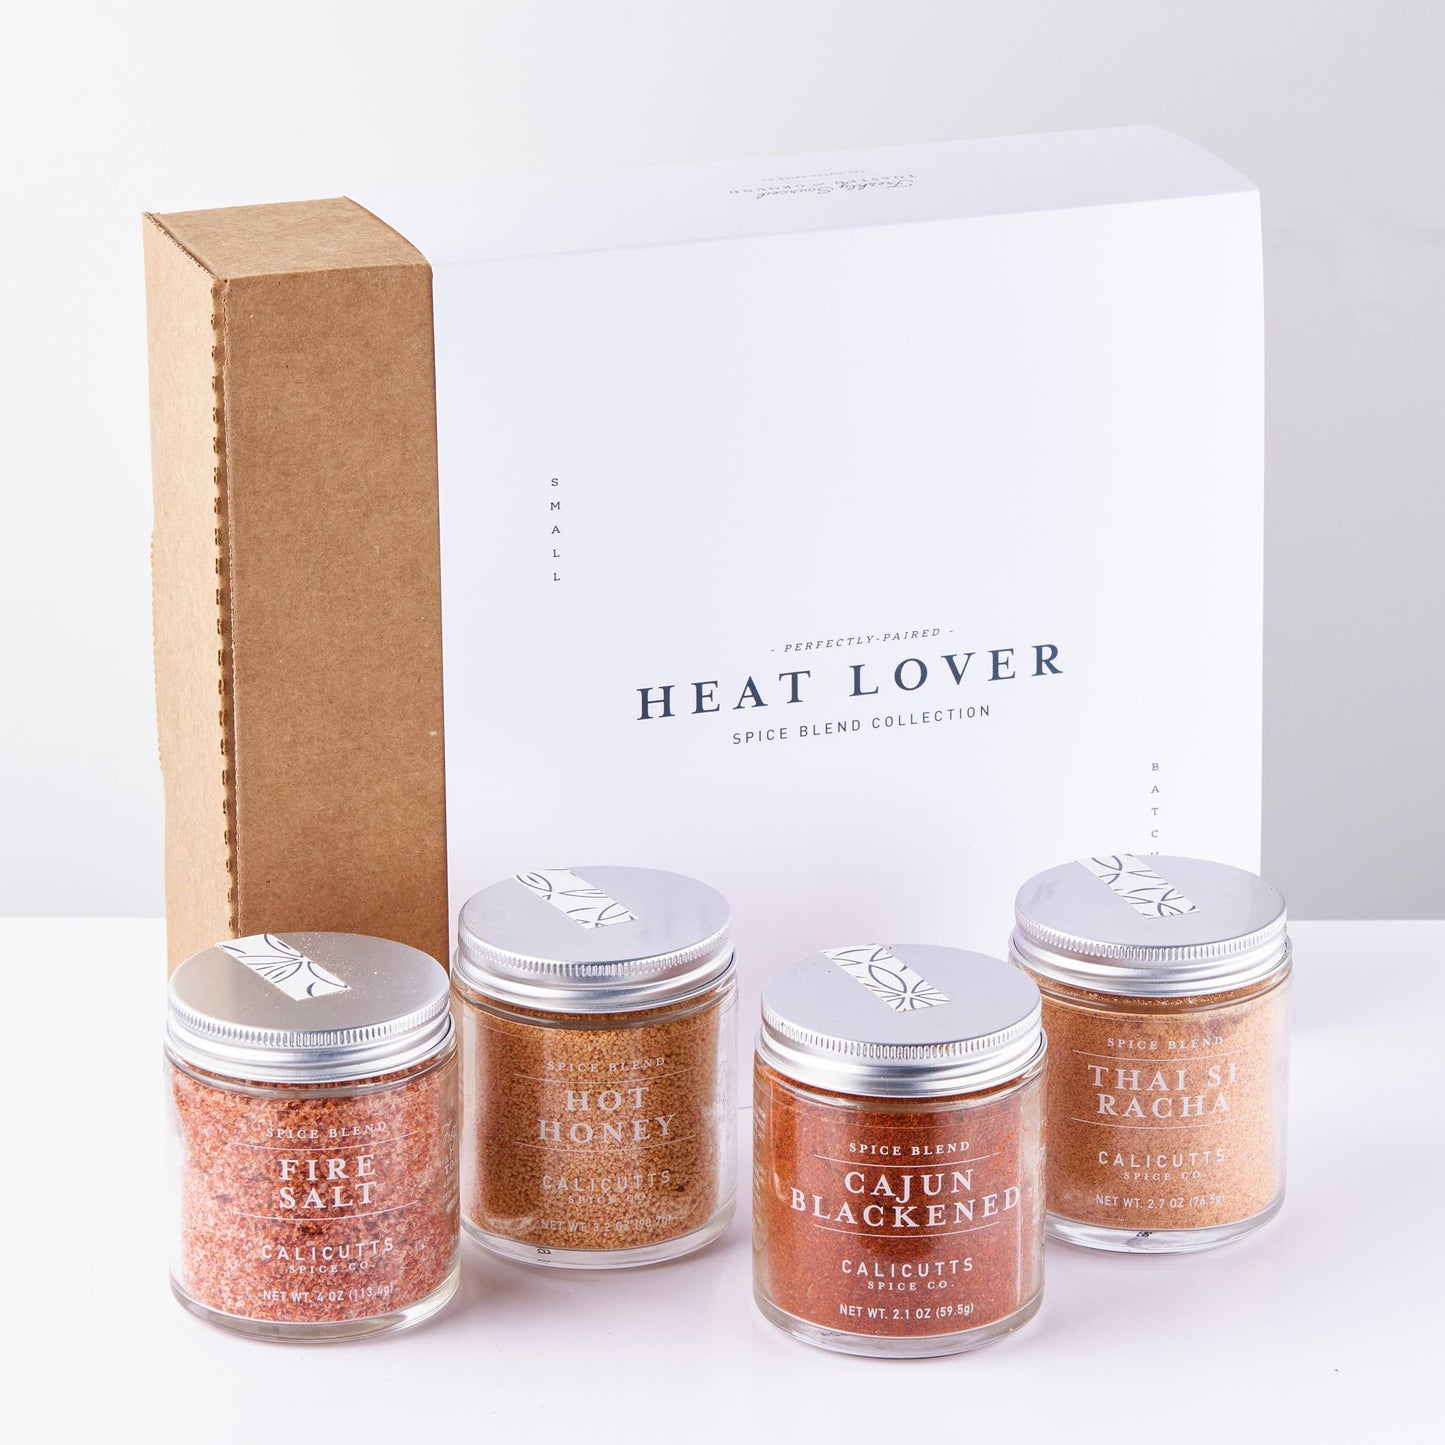 Heat Lover Spice Blend Collection